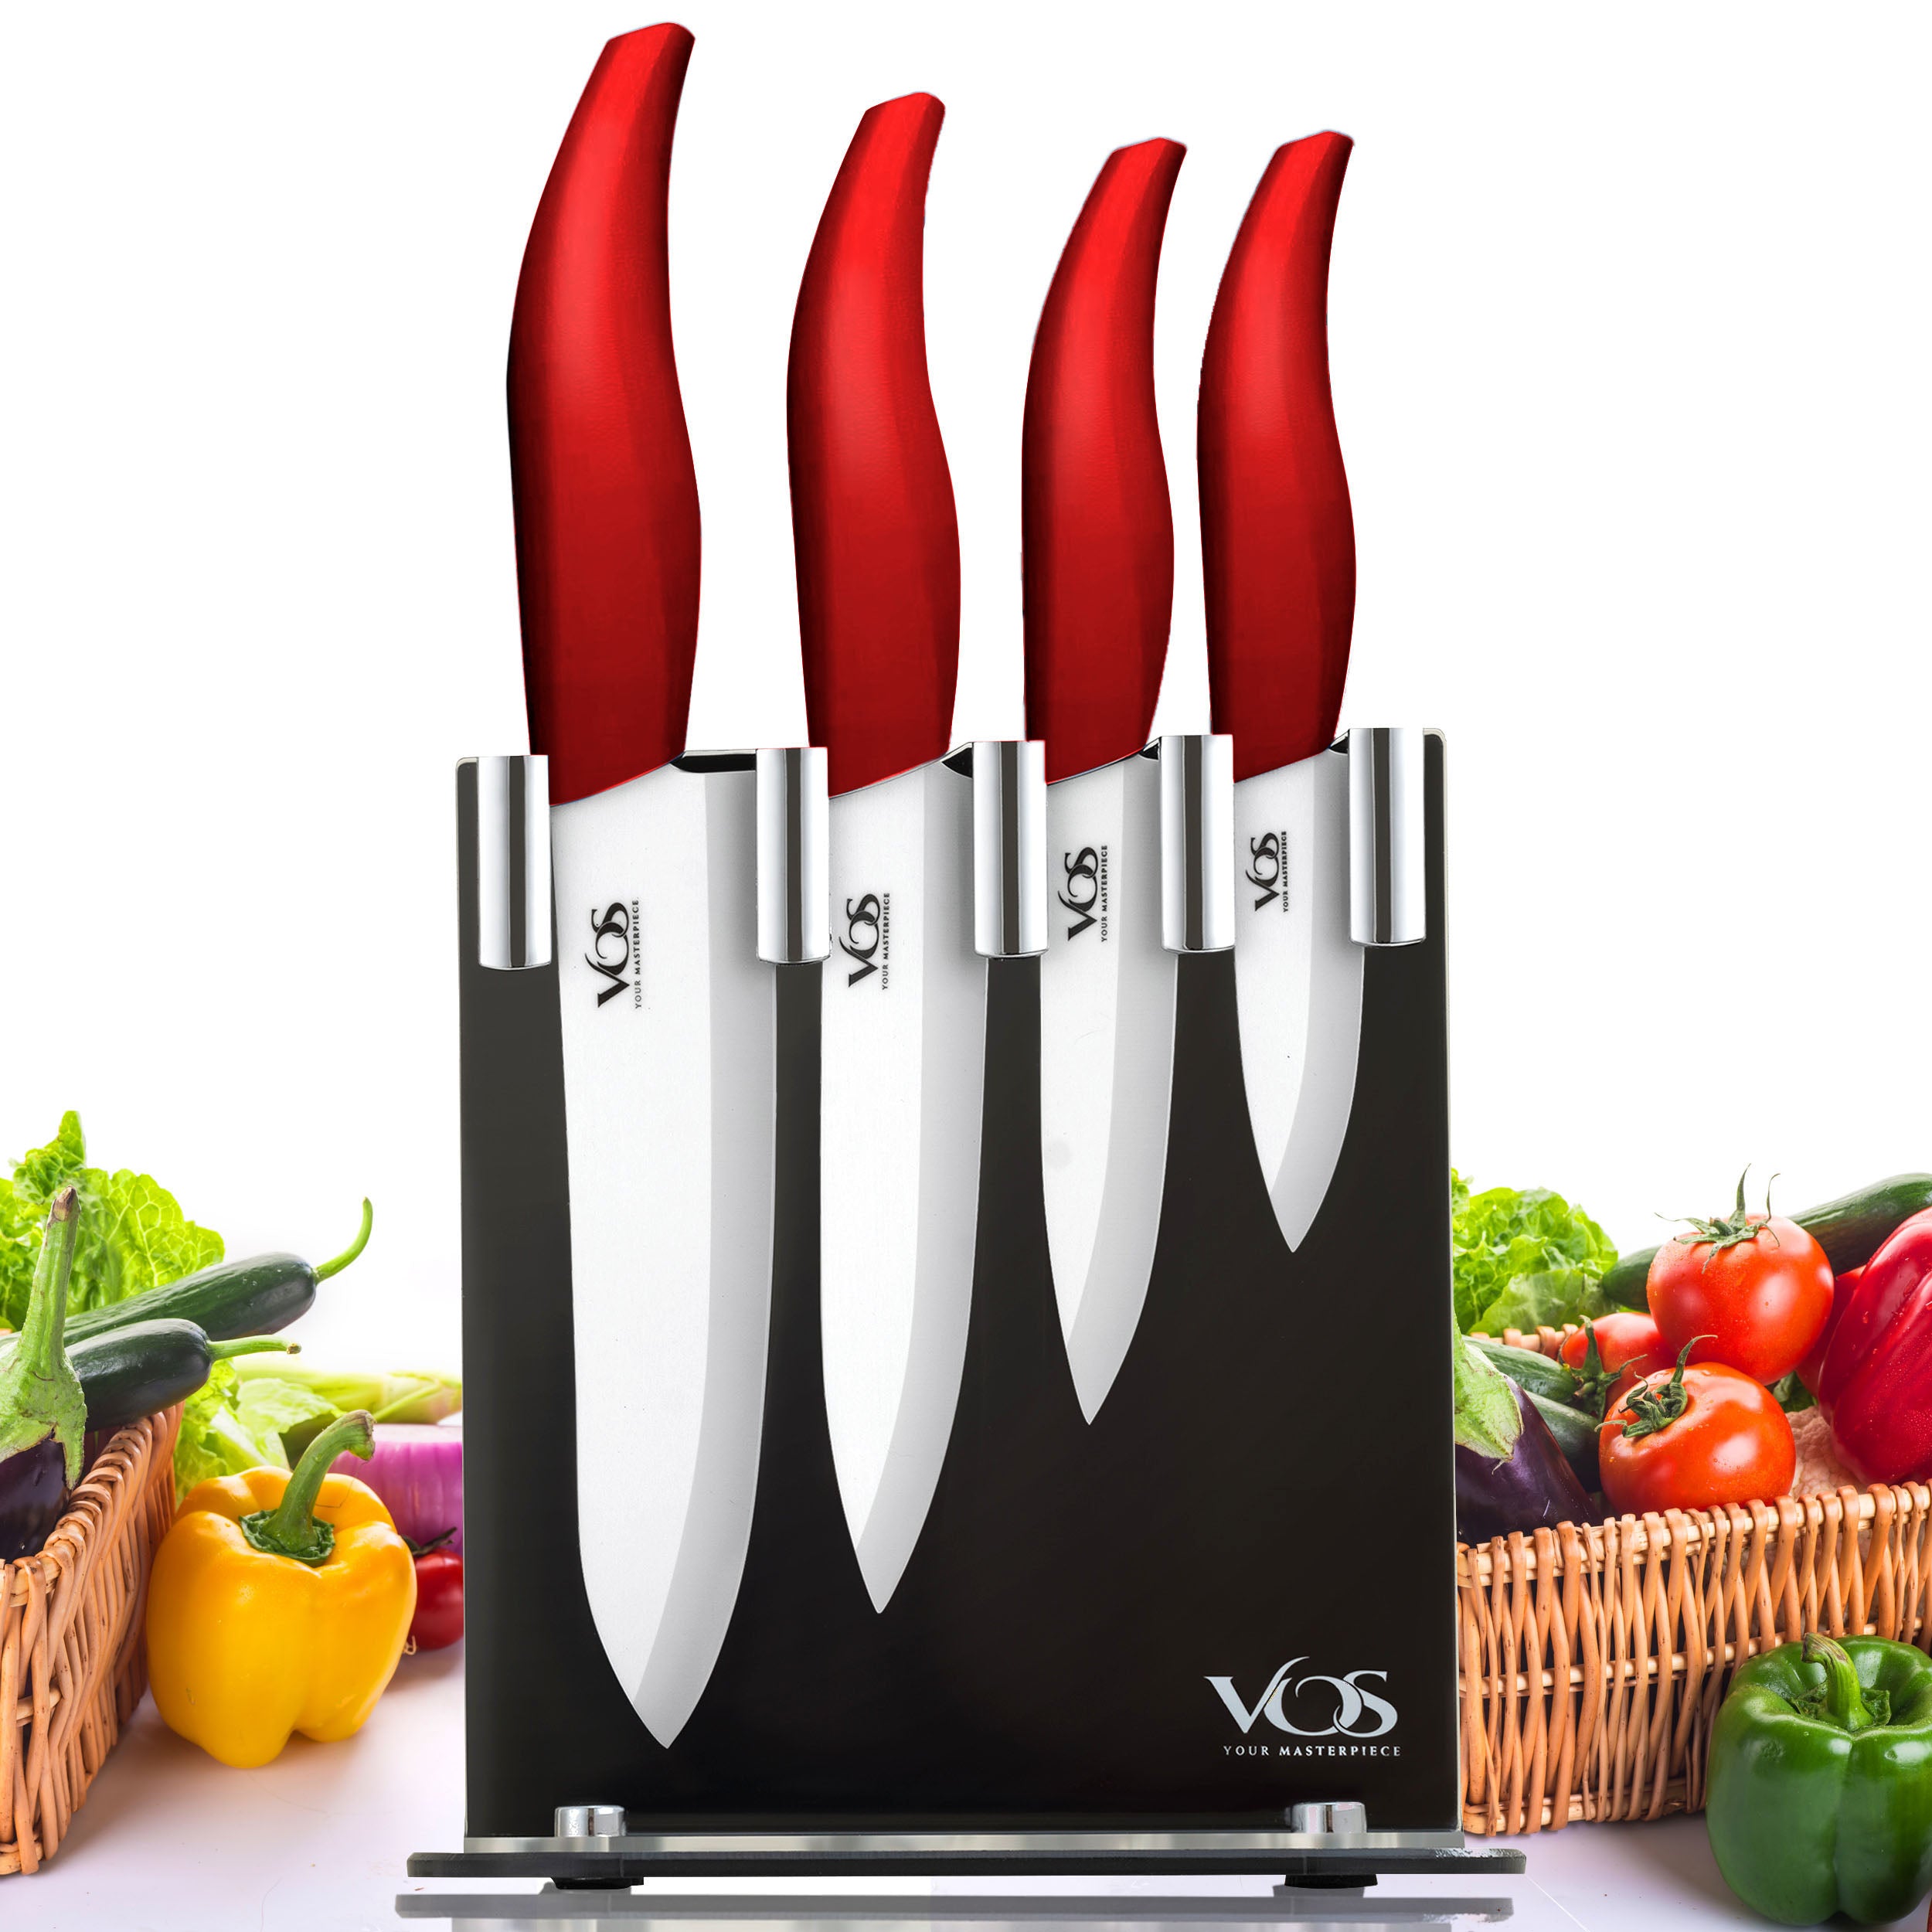 Maarten Kitchen Knives Set - 4 Piece Stainless Steel Chef Knife Set with Sheath - Boxed Knife Sets Gifts for Family (Red)